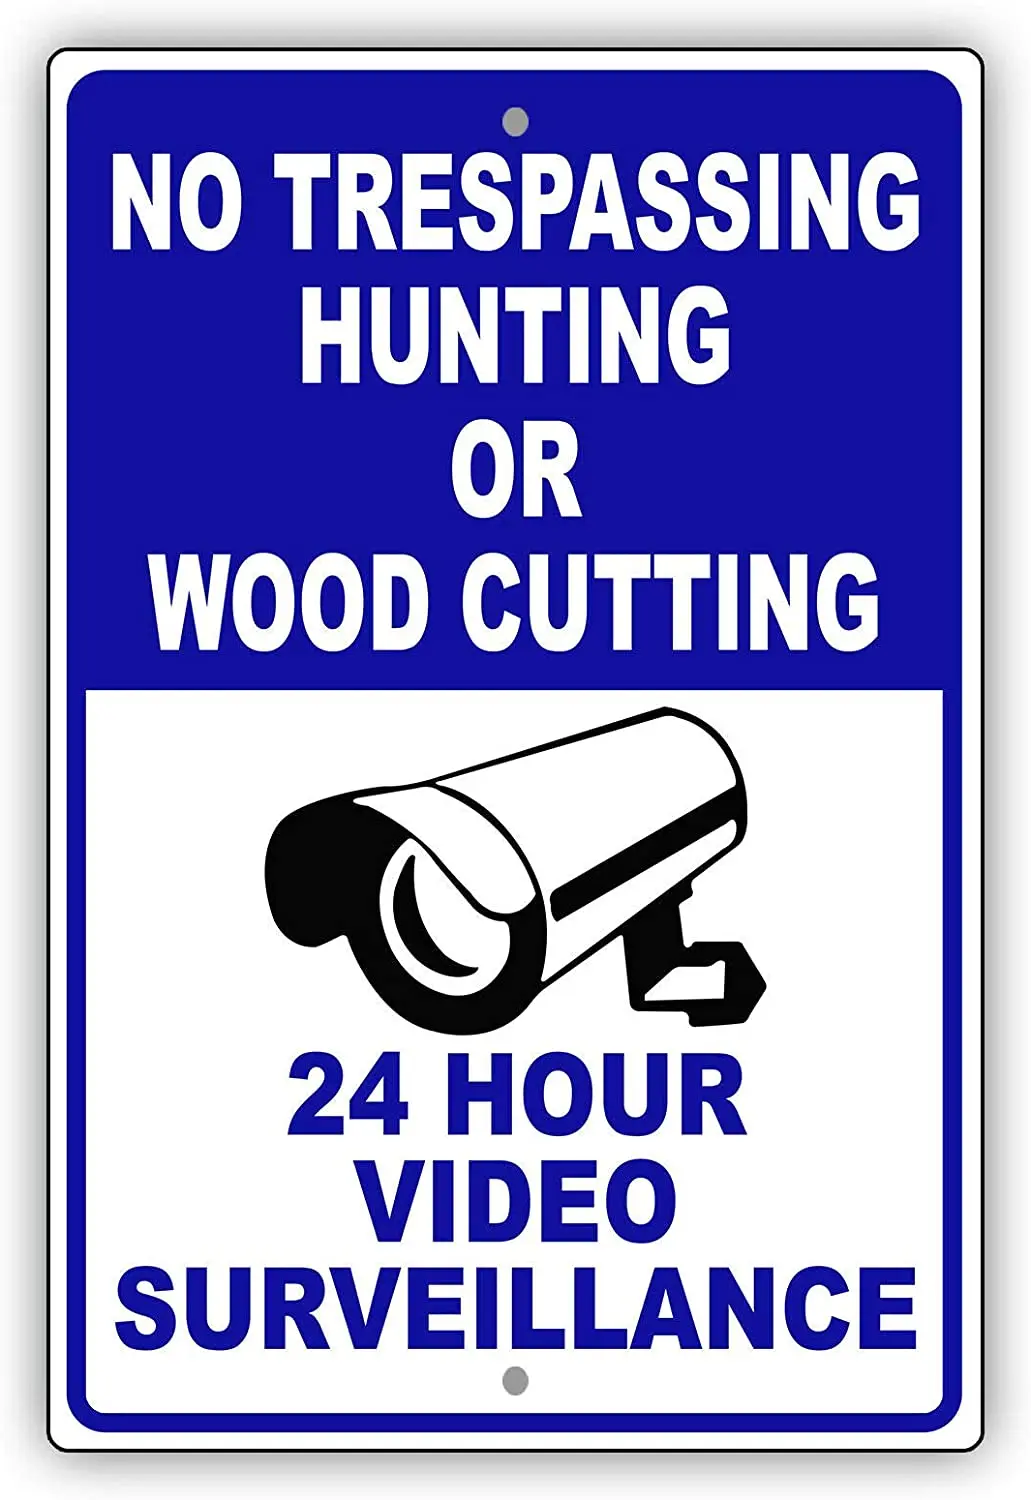 

Afterprints No Trespassing Hunting Or Wood Cutting 12 Hour Video Unique Novelty Alert Warning Notice Aluminum Metal Sign 8"x12"